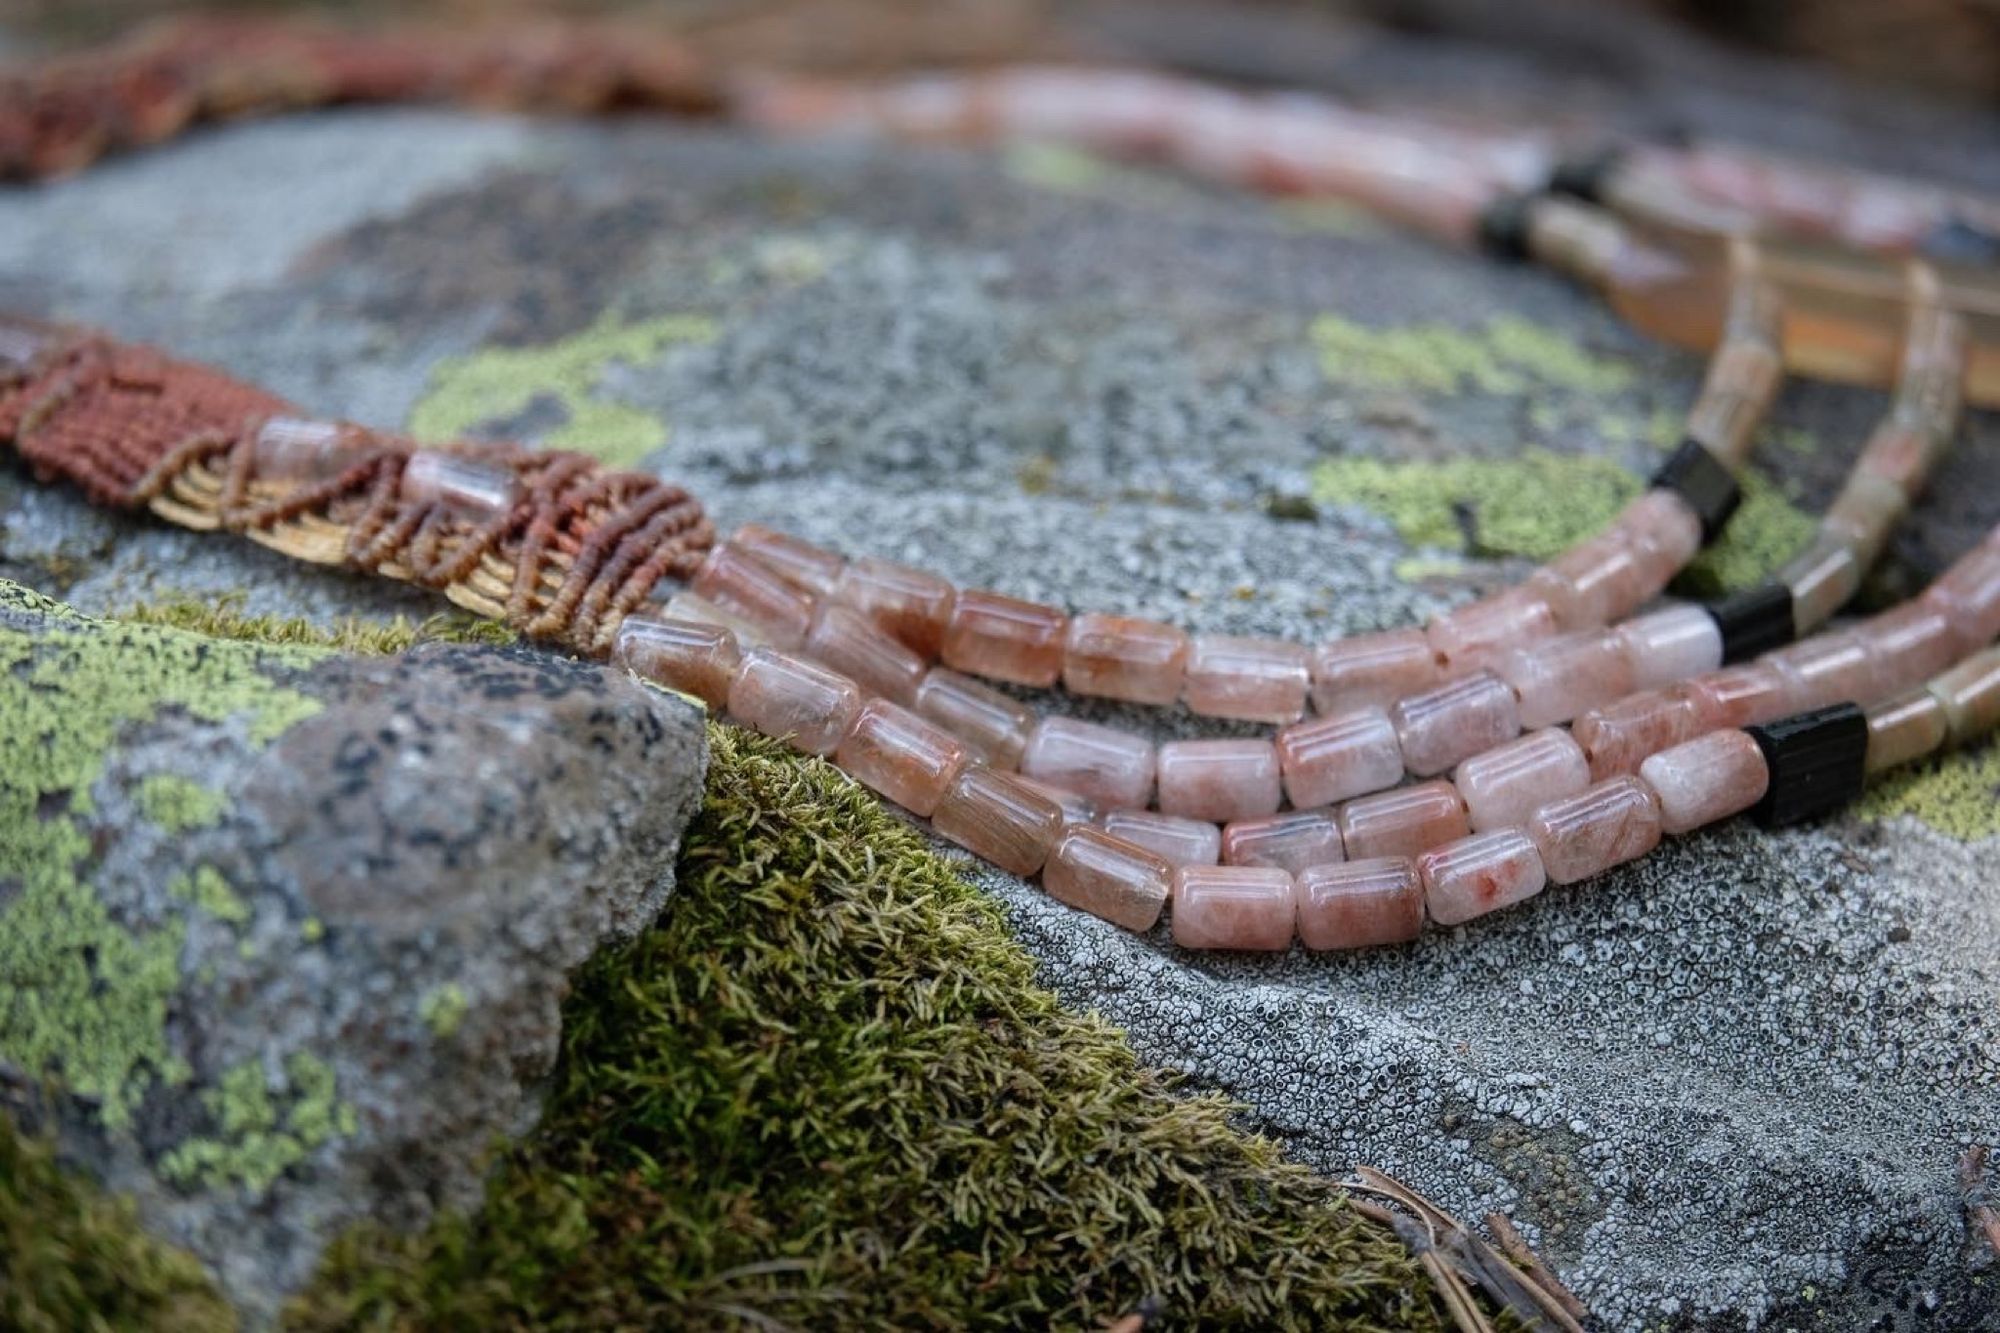 Four strand Zambian citrine, pink Rutilated quartz and black tourmaline necklace laying on a mossy rock